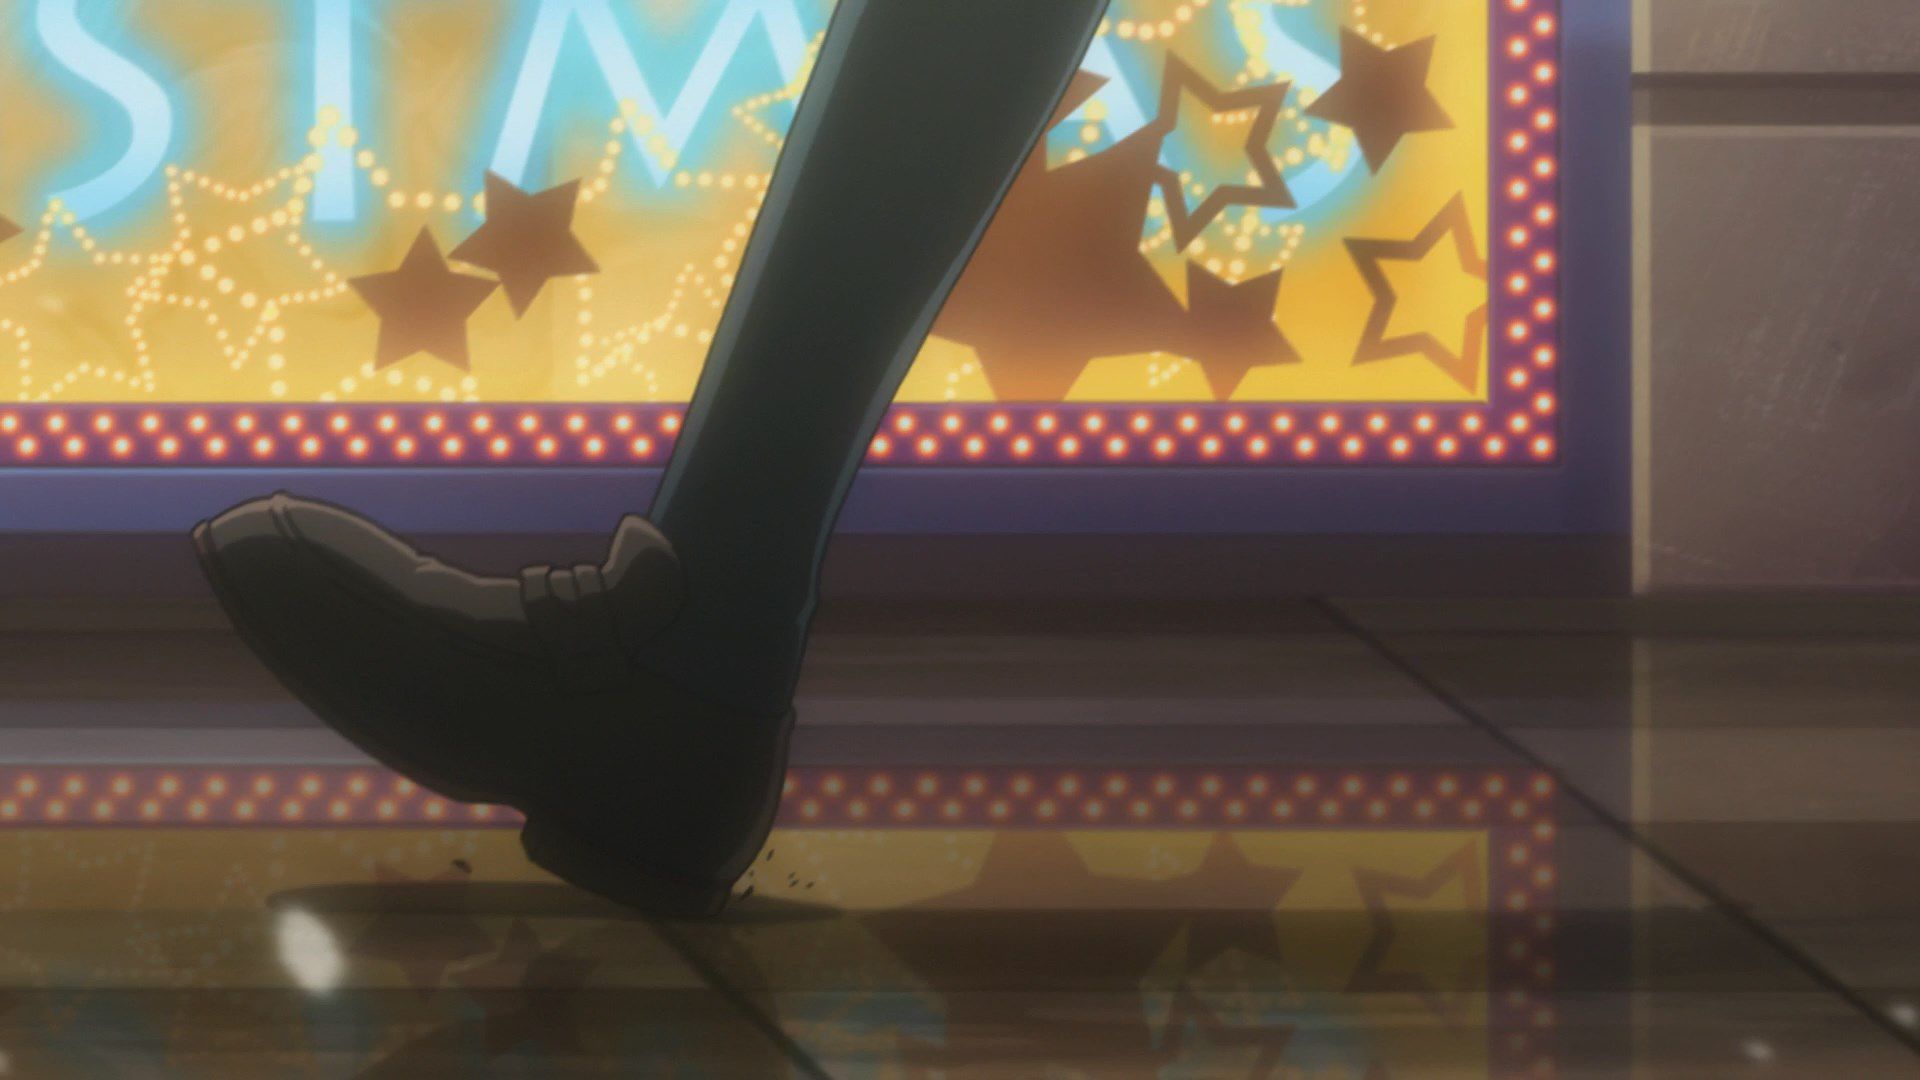 [God images] "love live! ' Μm ' PV's leg is too erotic everyone wakes up to a leg fetish of wwwww 7